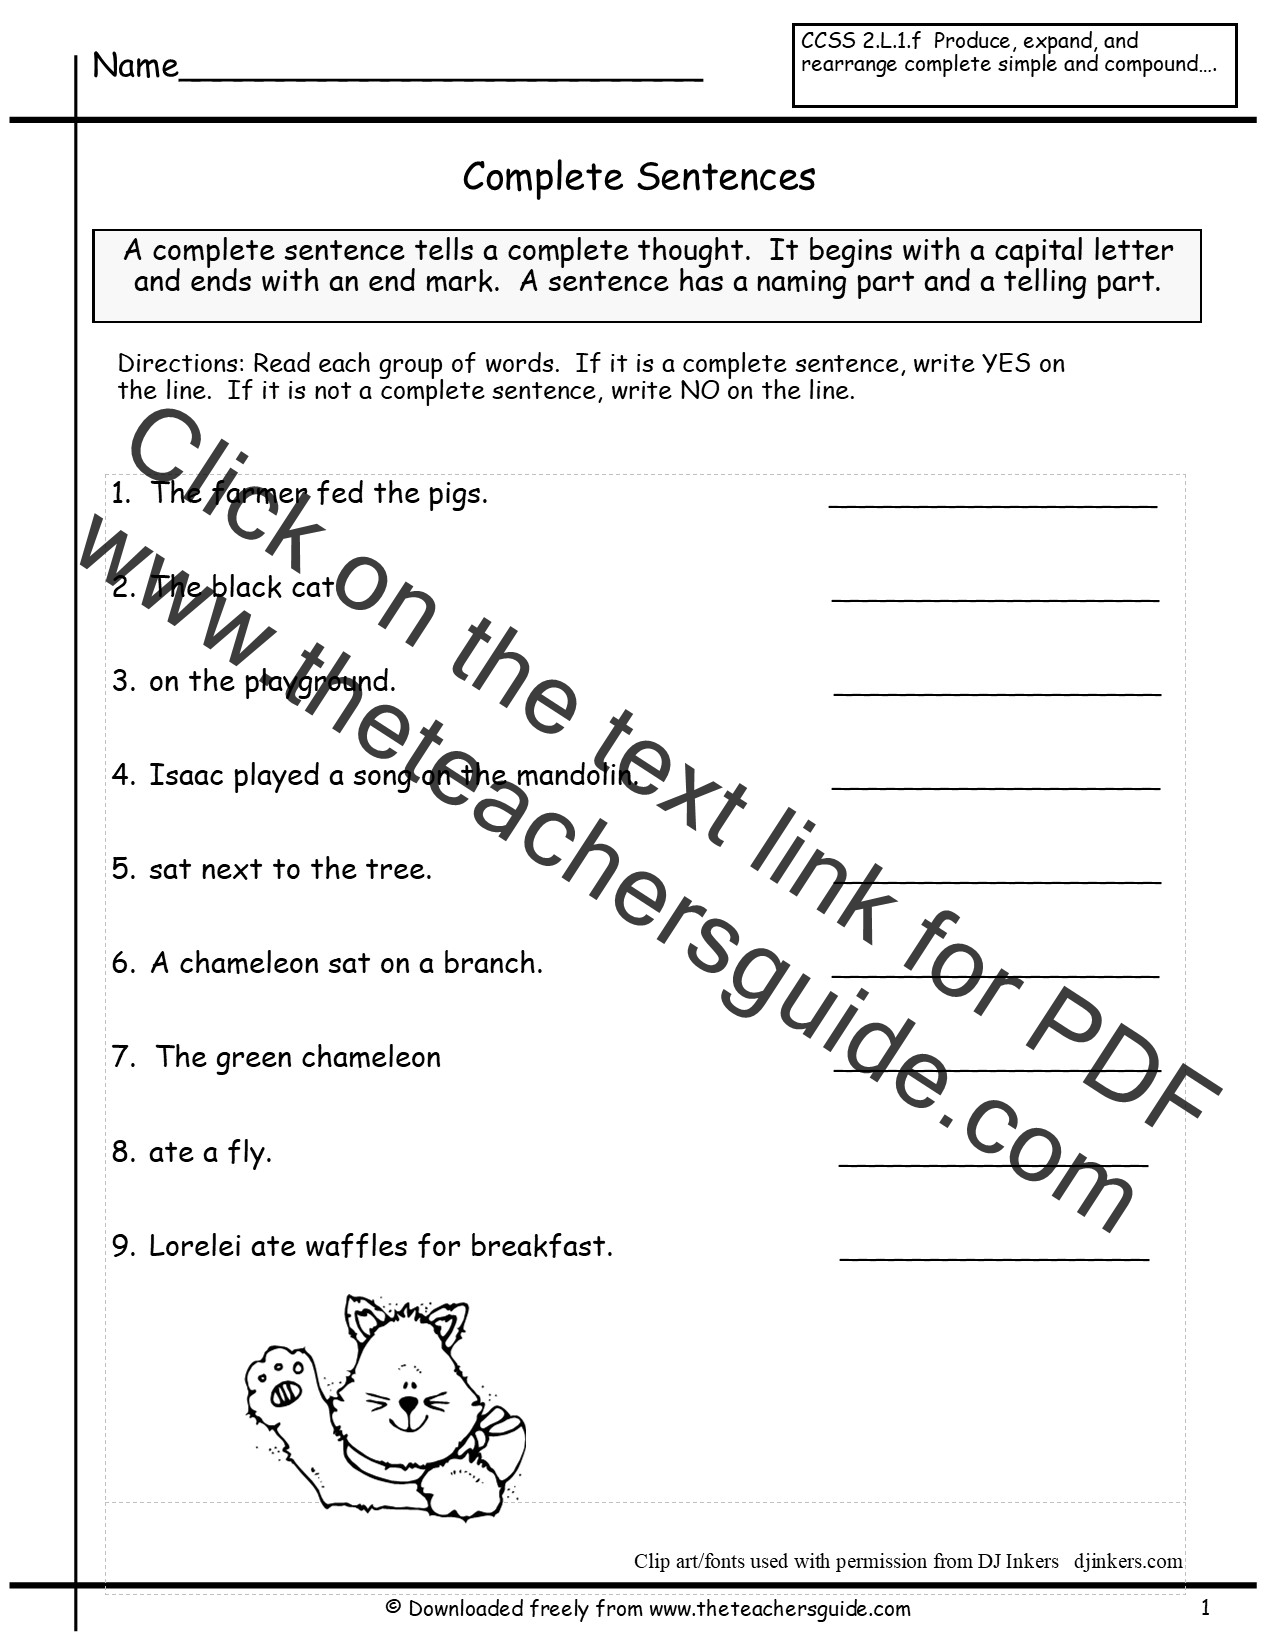 Free Writing And Language Arts From The Teacher s Guide